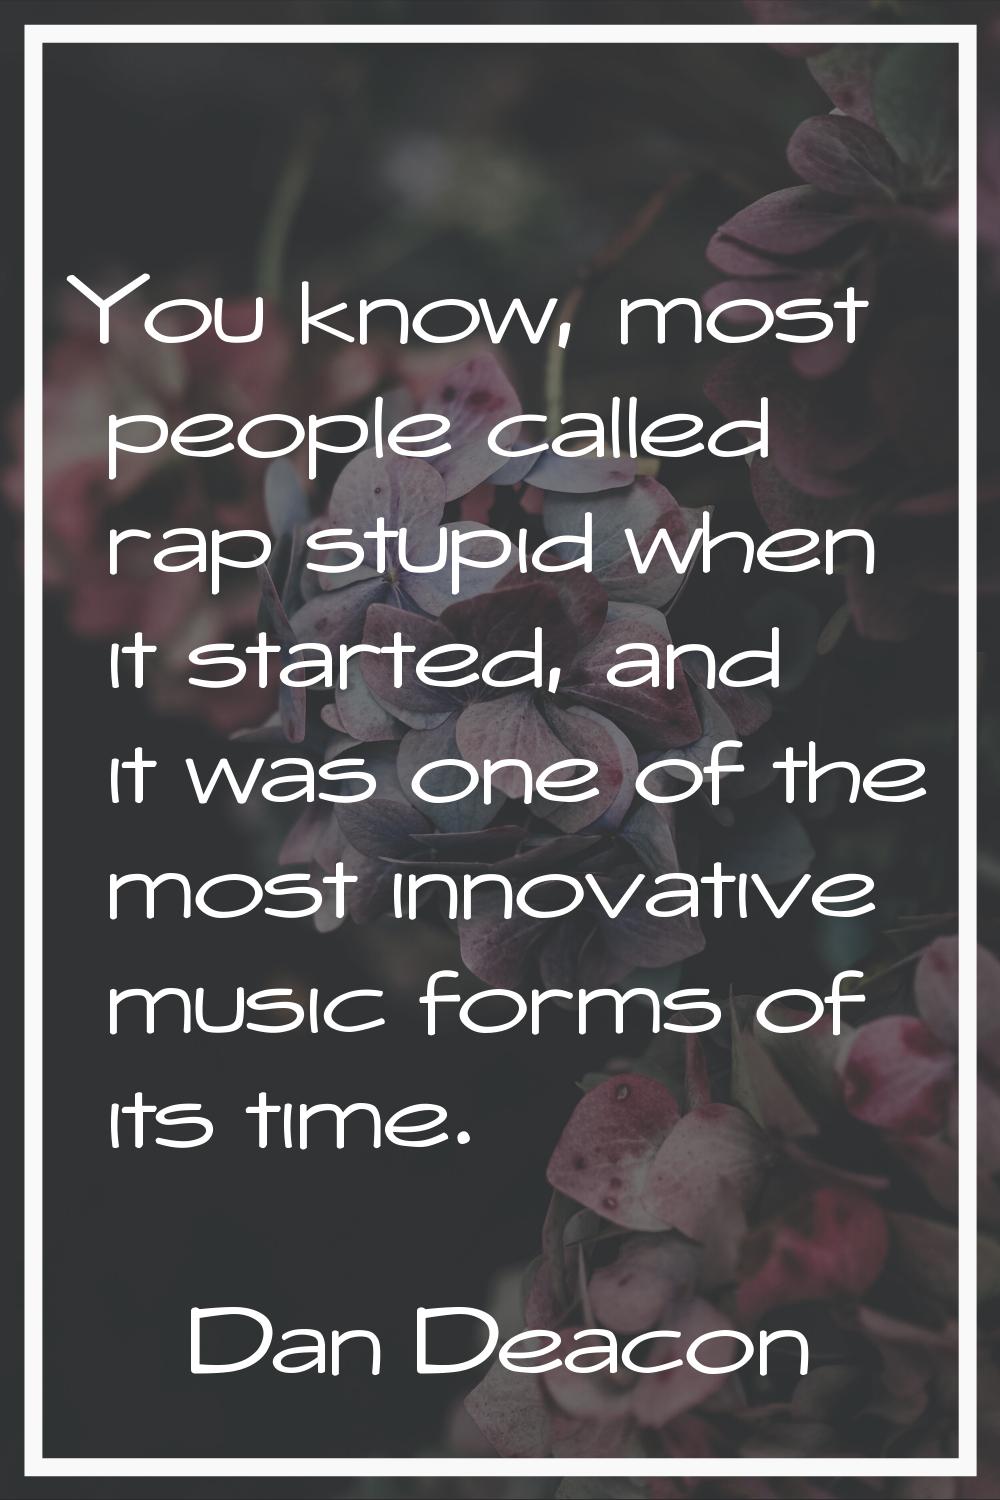 You know, most people called rap stupid when it started, and it was one of the most innovative musi